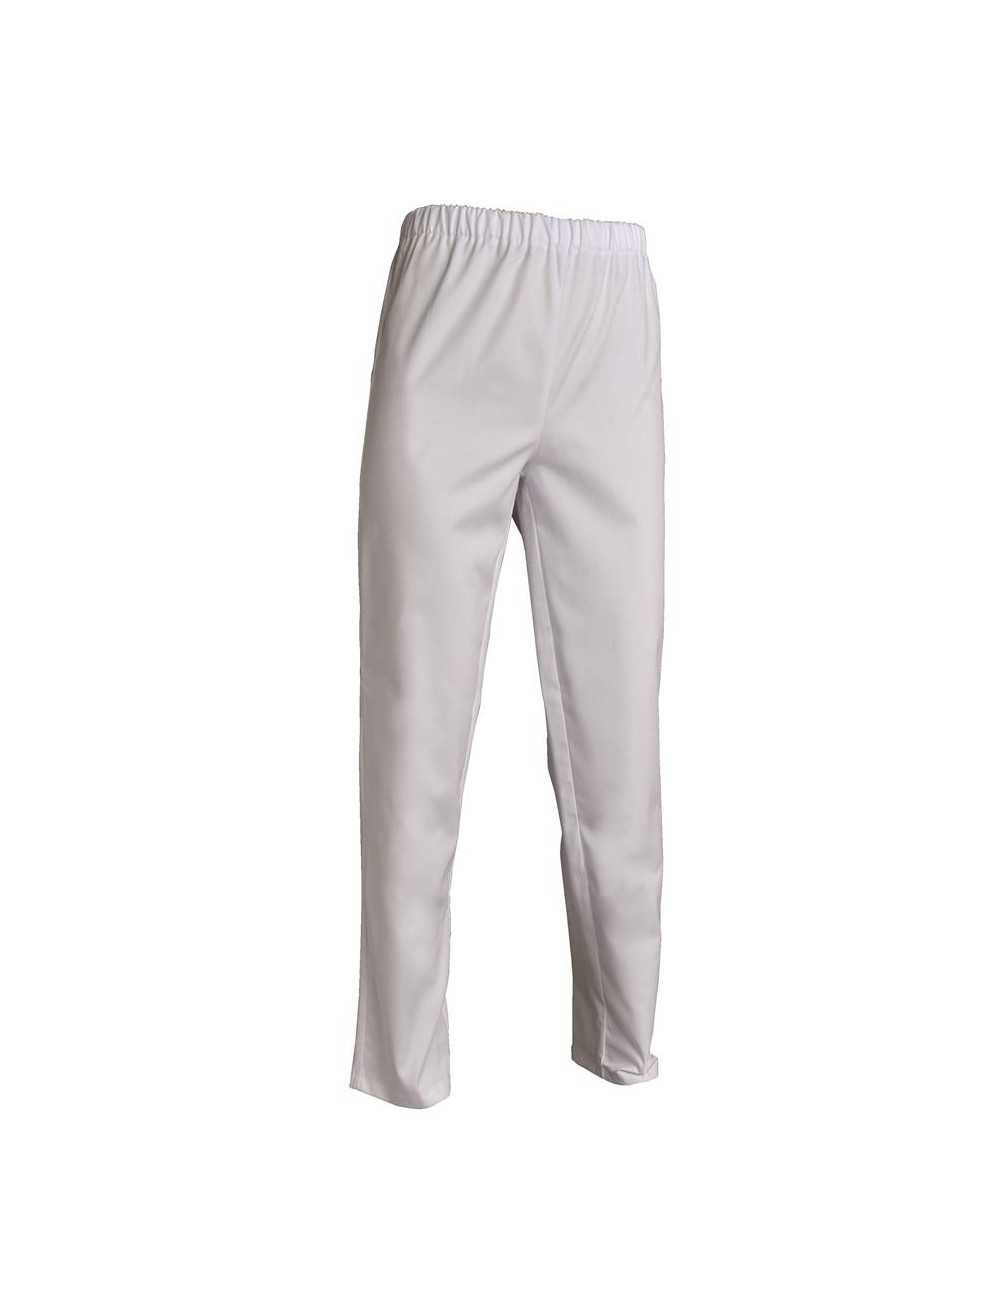 https://www.mankaia.com/16708-zoom_product/white-poly-cotton-unisex-medical-pants-snv-adlx00000.jpg